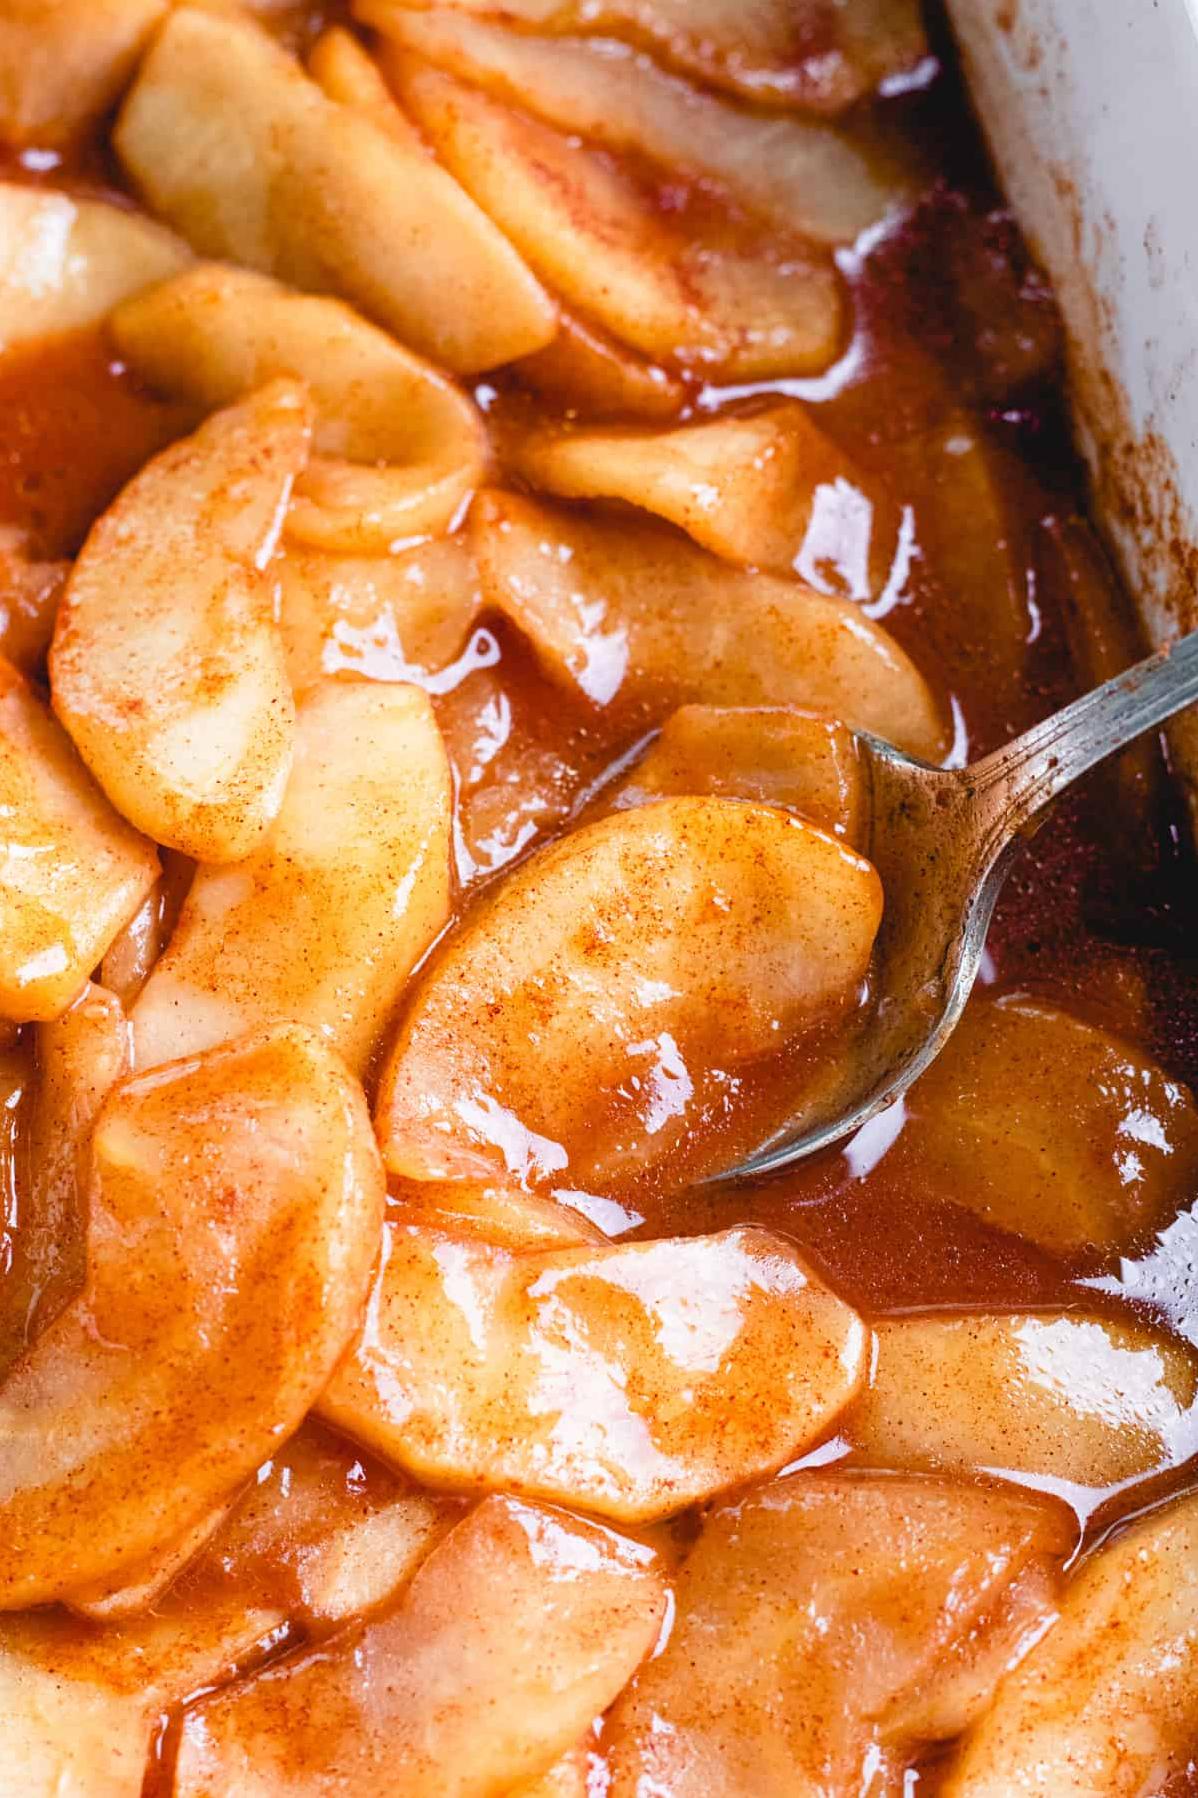  Sink your teeth into these warm, gooey, and gluten-free cinna-baked apples